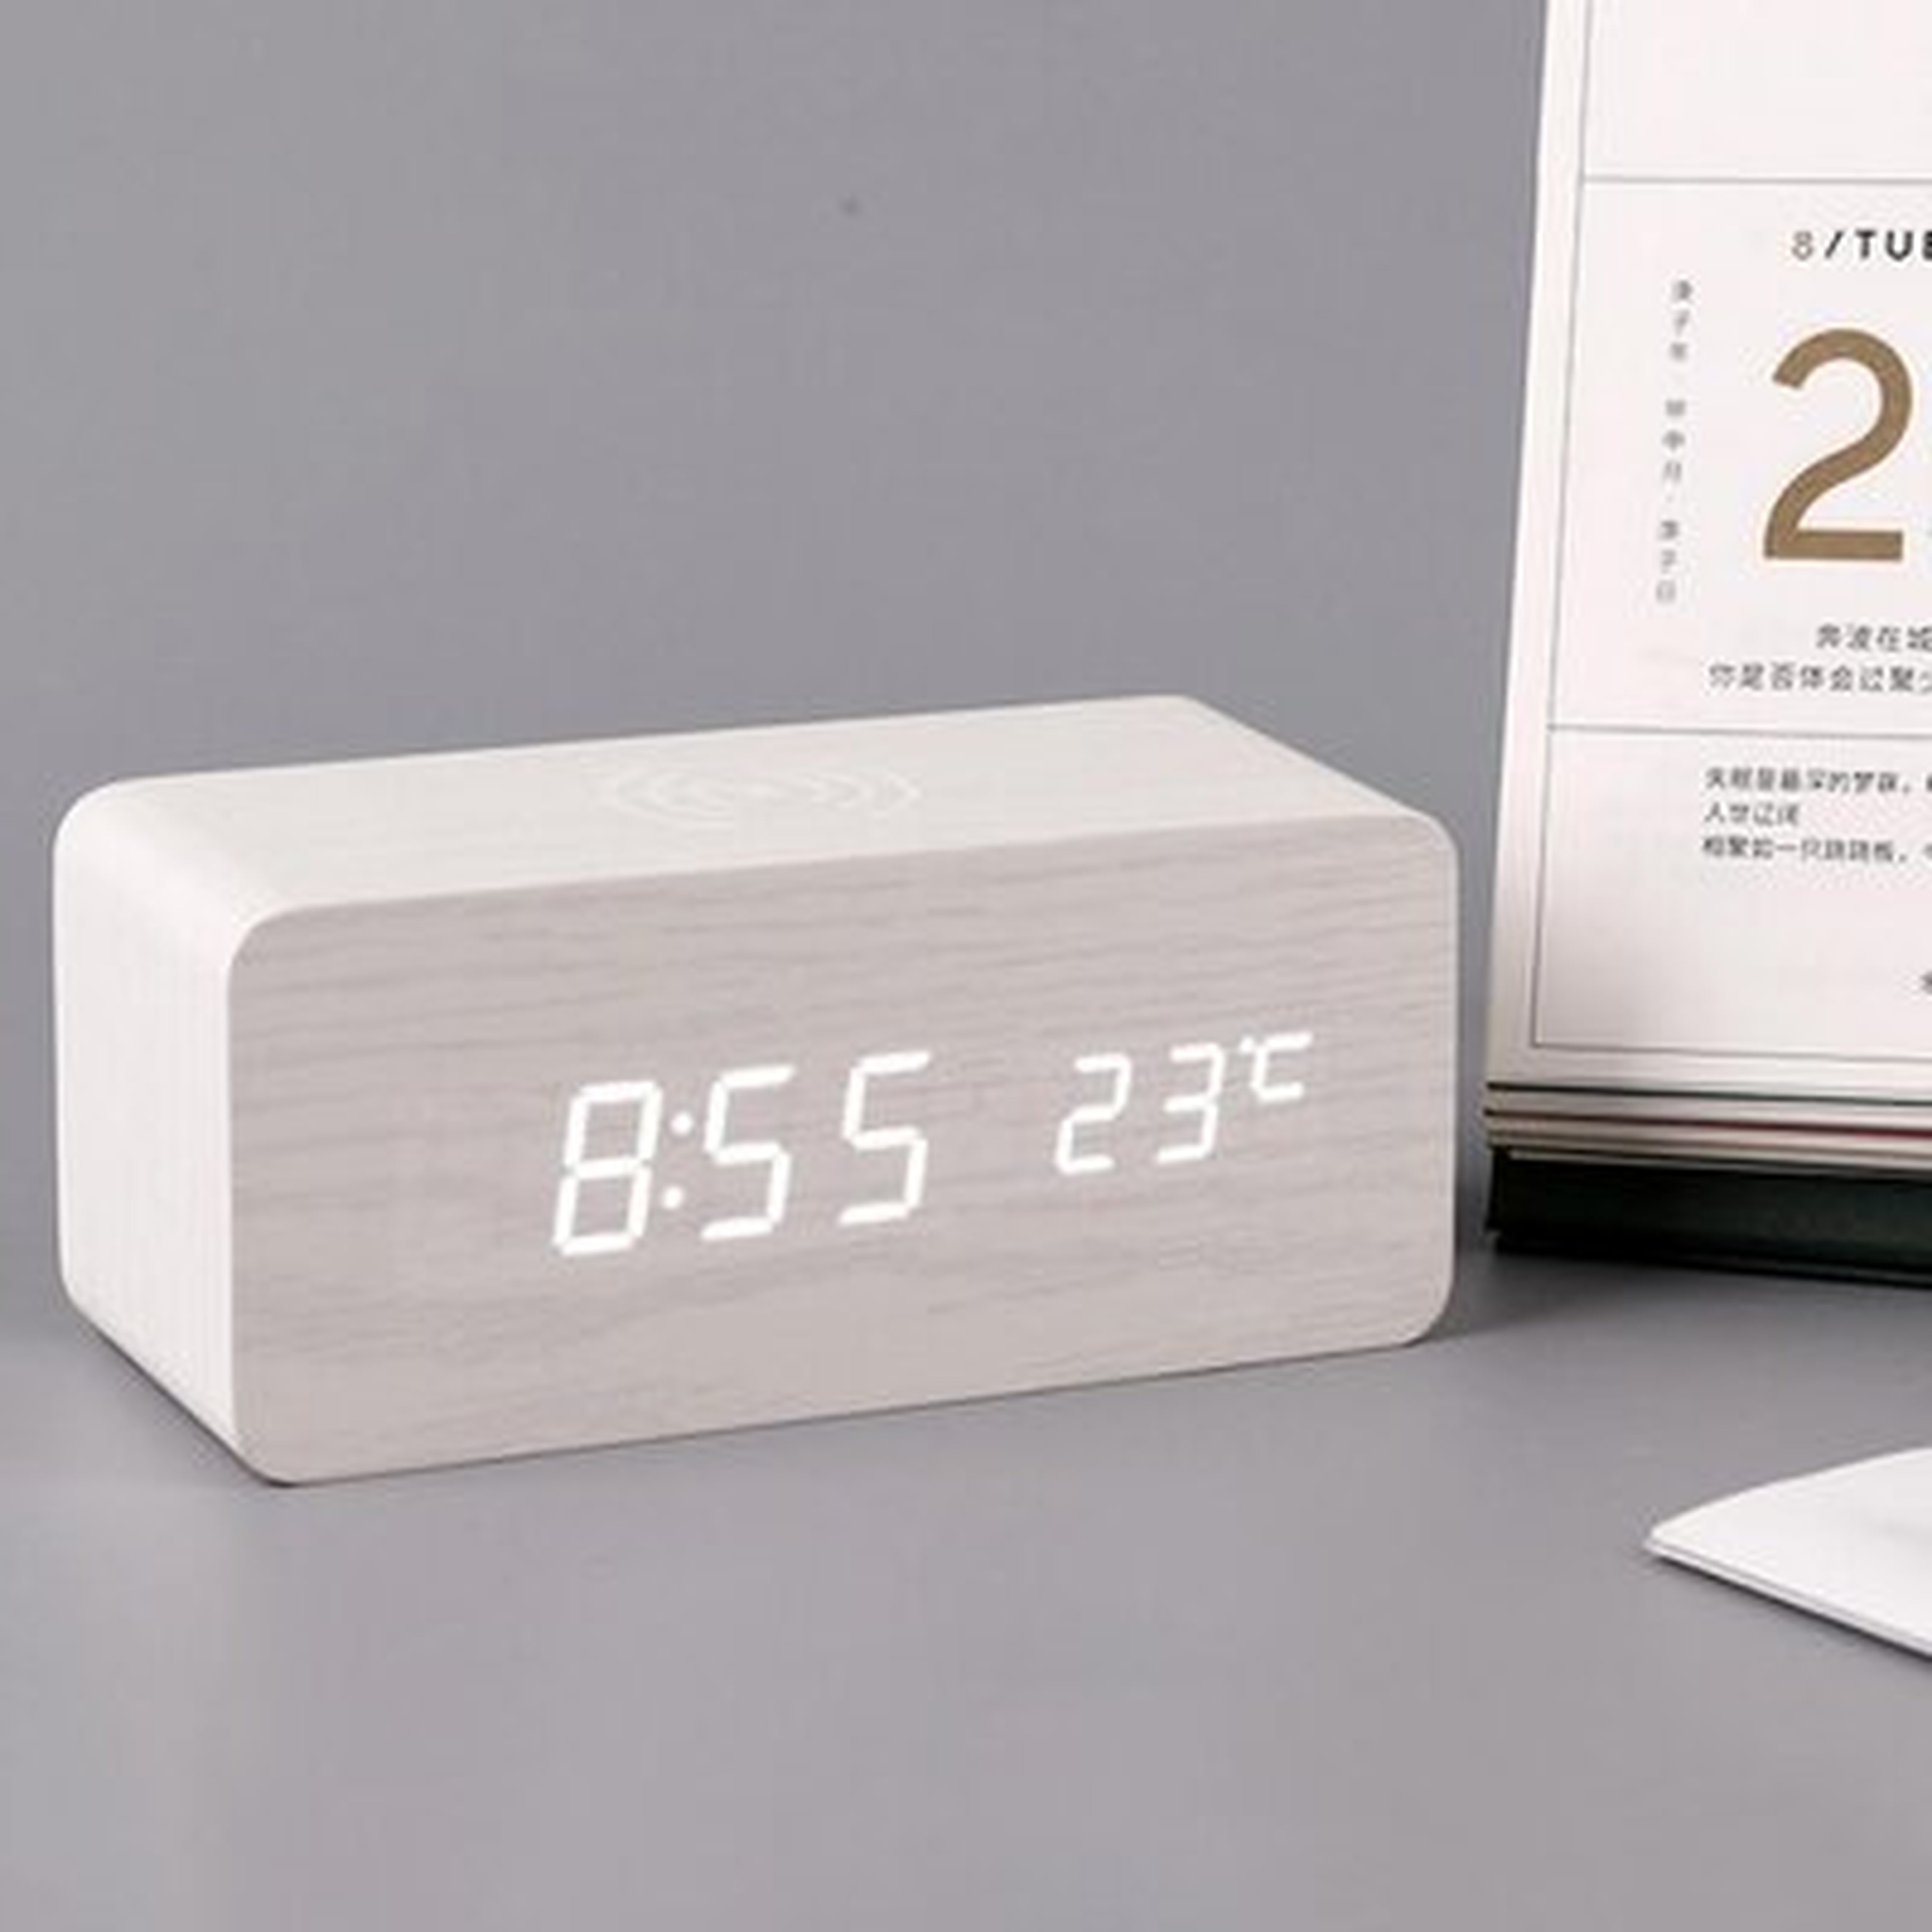 Digital Wooden Alarm Clock With Wireless Charging Function 3 Alarm LED Dual Functions Sound Control Multifunctional Digital Alarm Clock - Wayfair